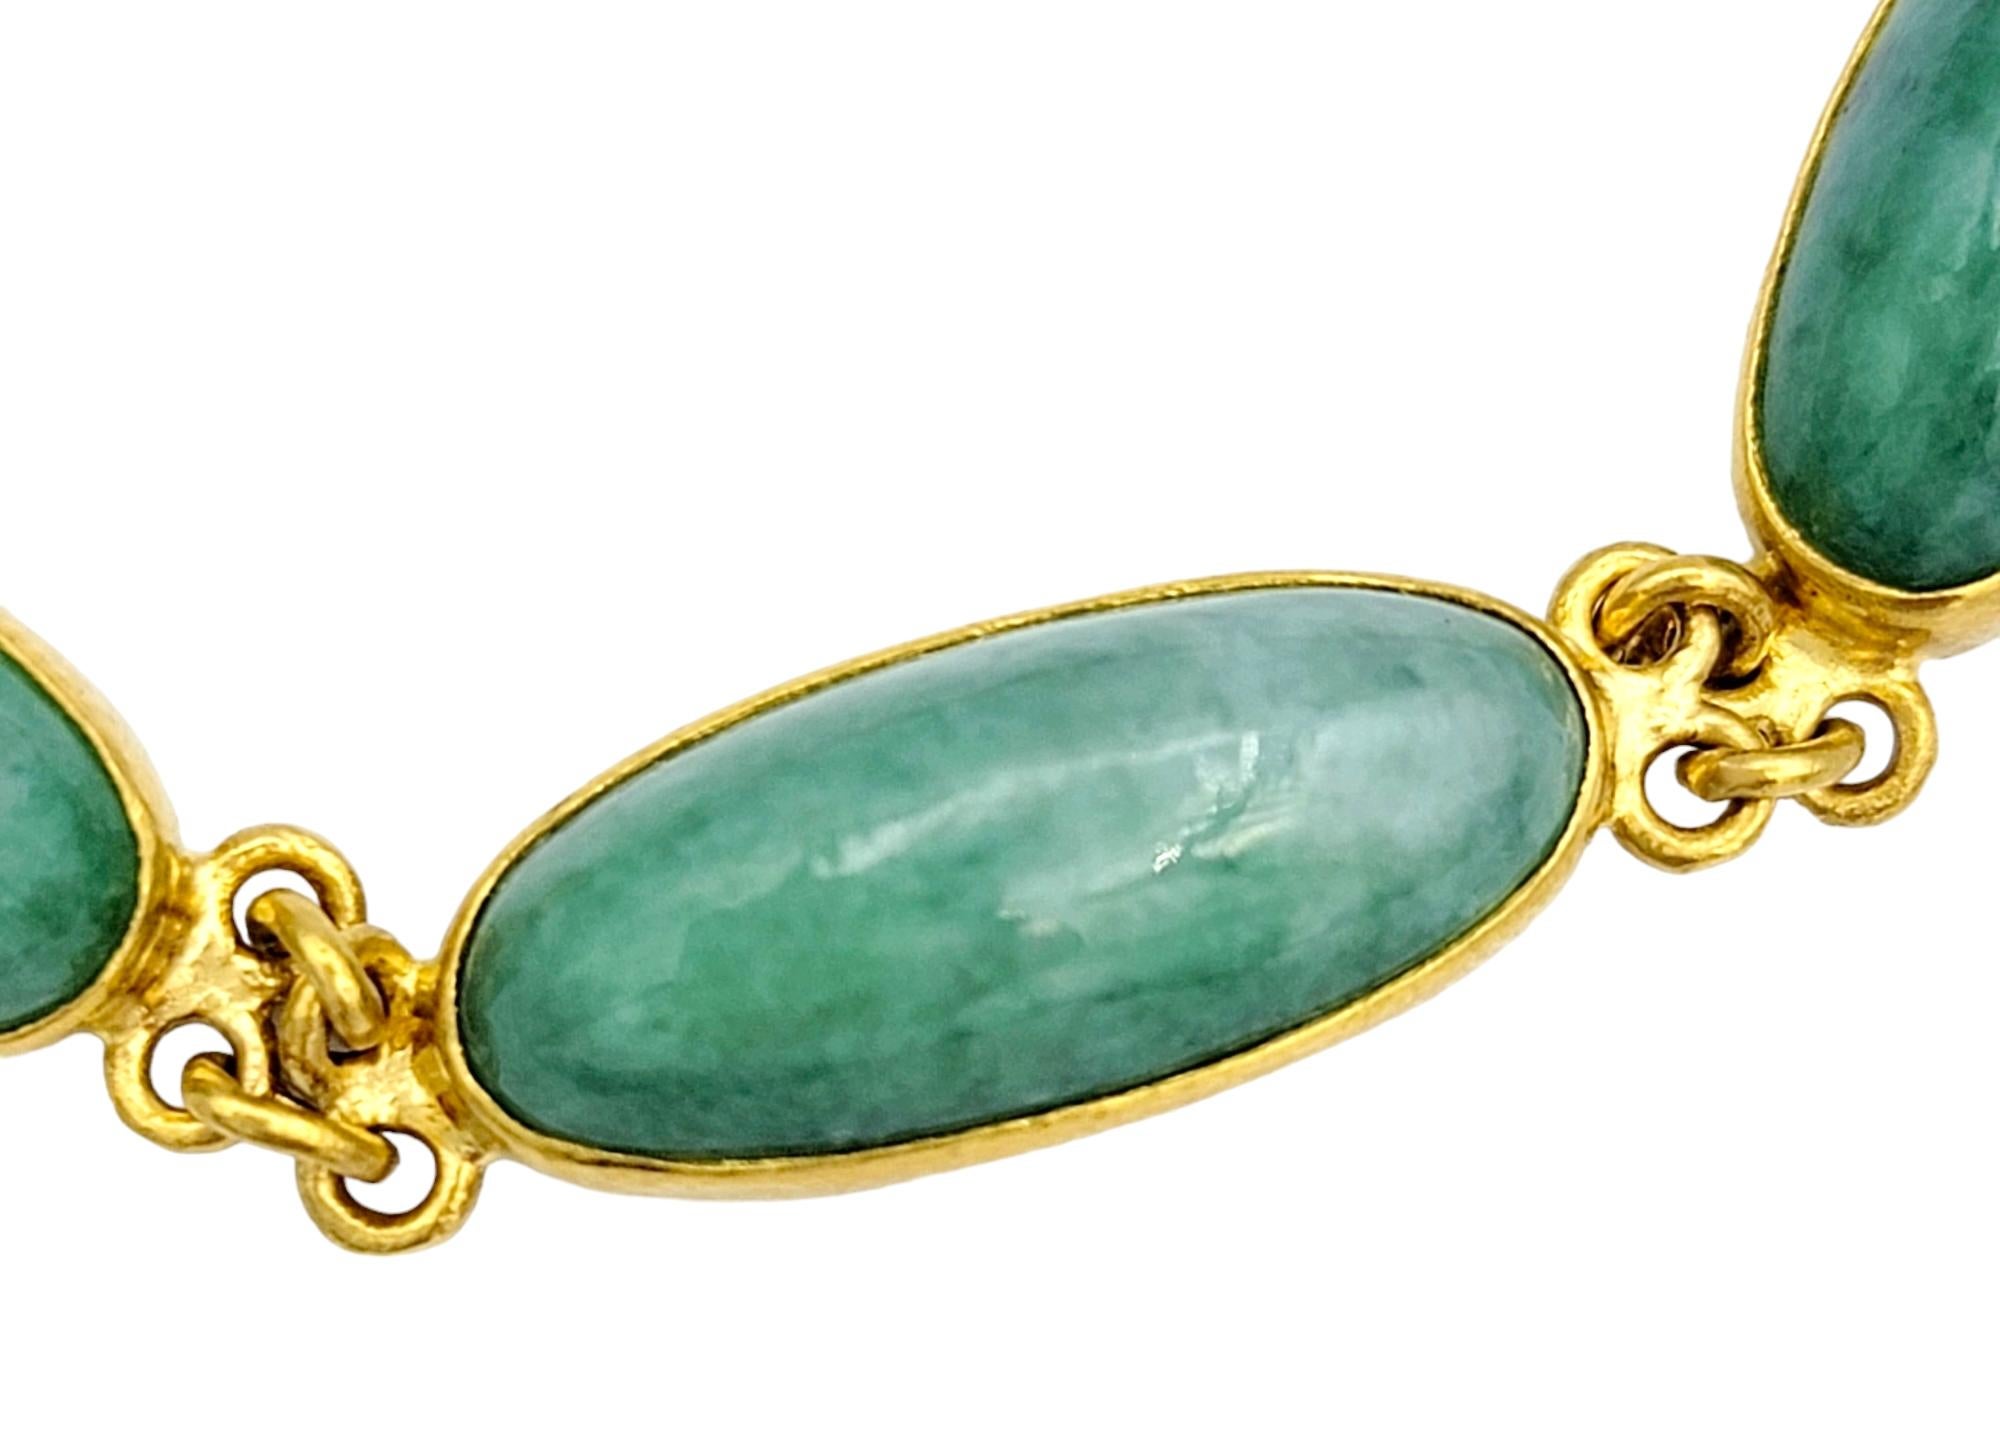 Elongated Oval Cabochon Jadeite Curb Link Bracelet Set in 24 Karat Yellow Gold  In Good Condition For Sale In Scottsdale, AZ